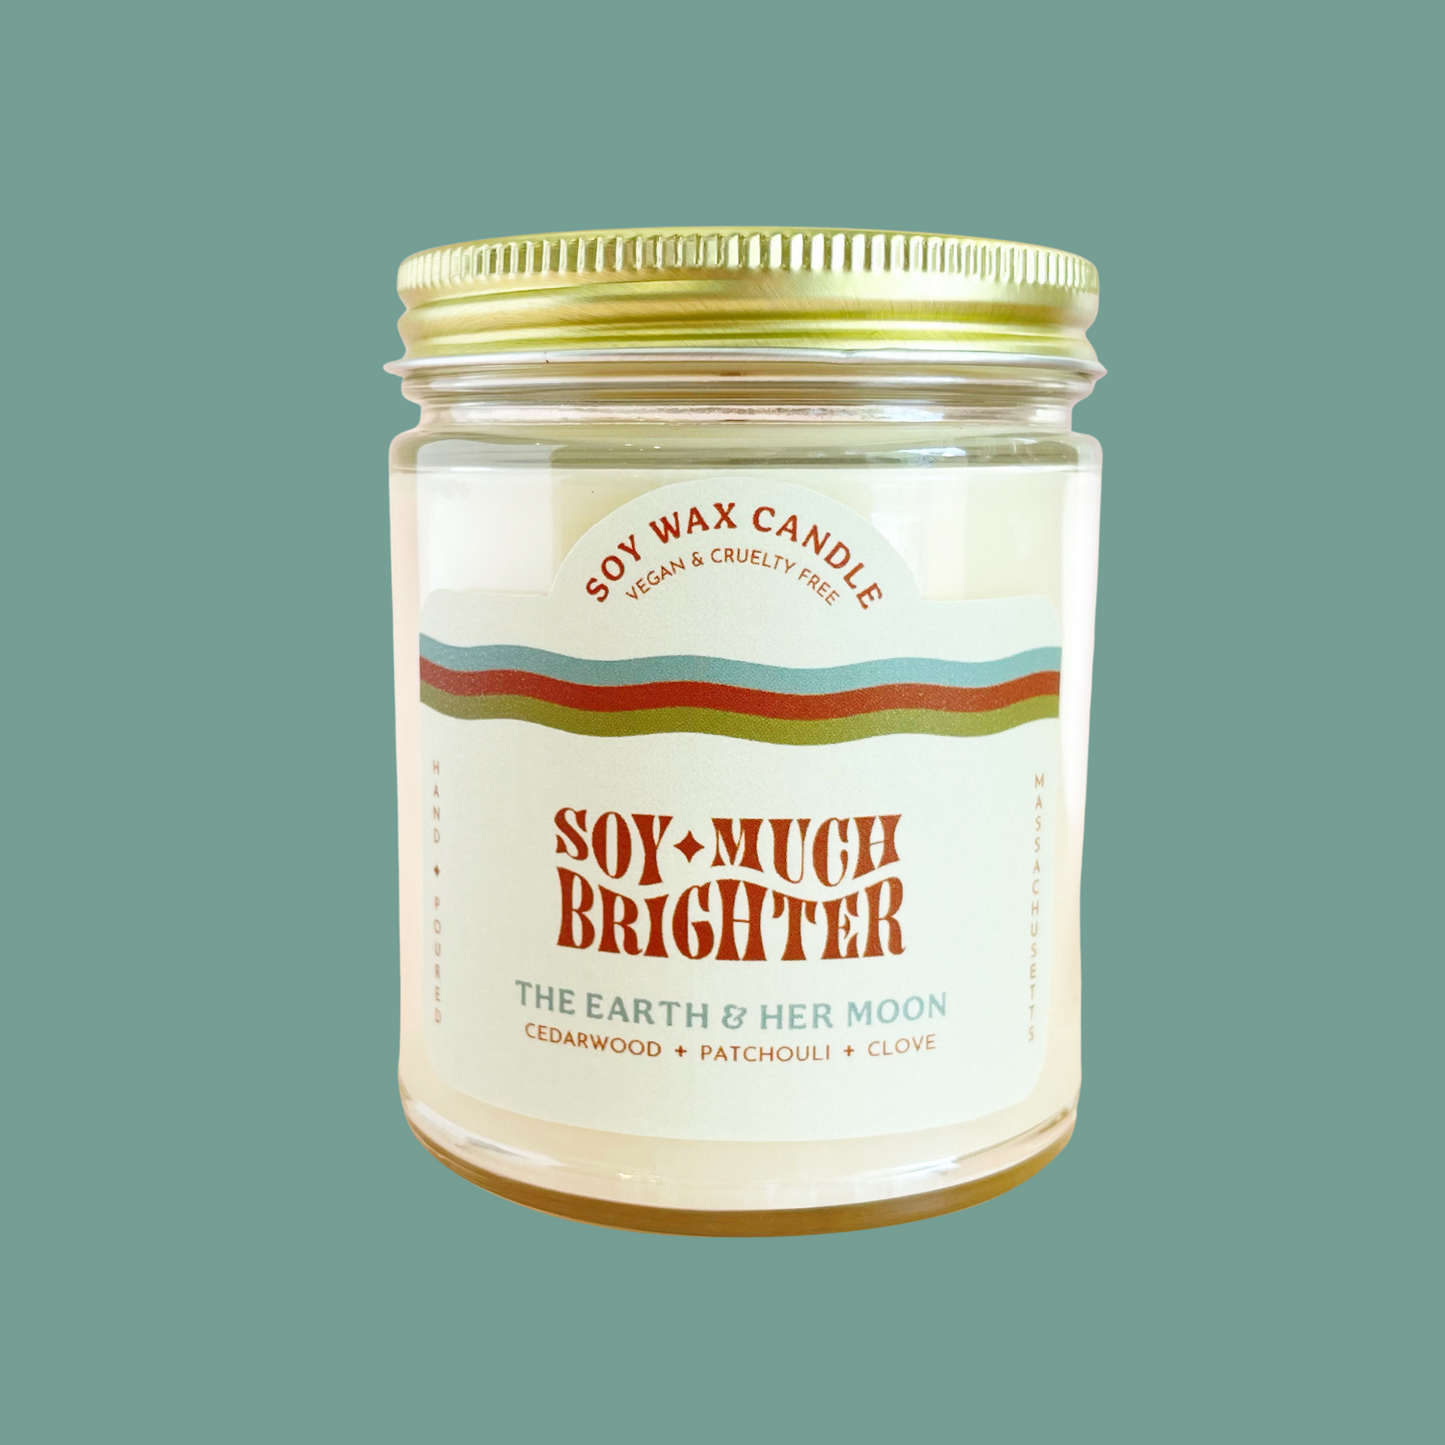 Cruelty-free, vegan, non toxic soy candles the Evergreen Earthly Bundle.